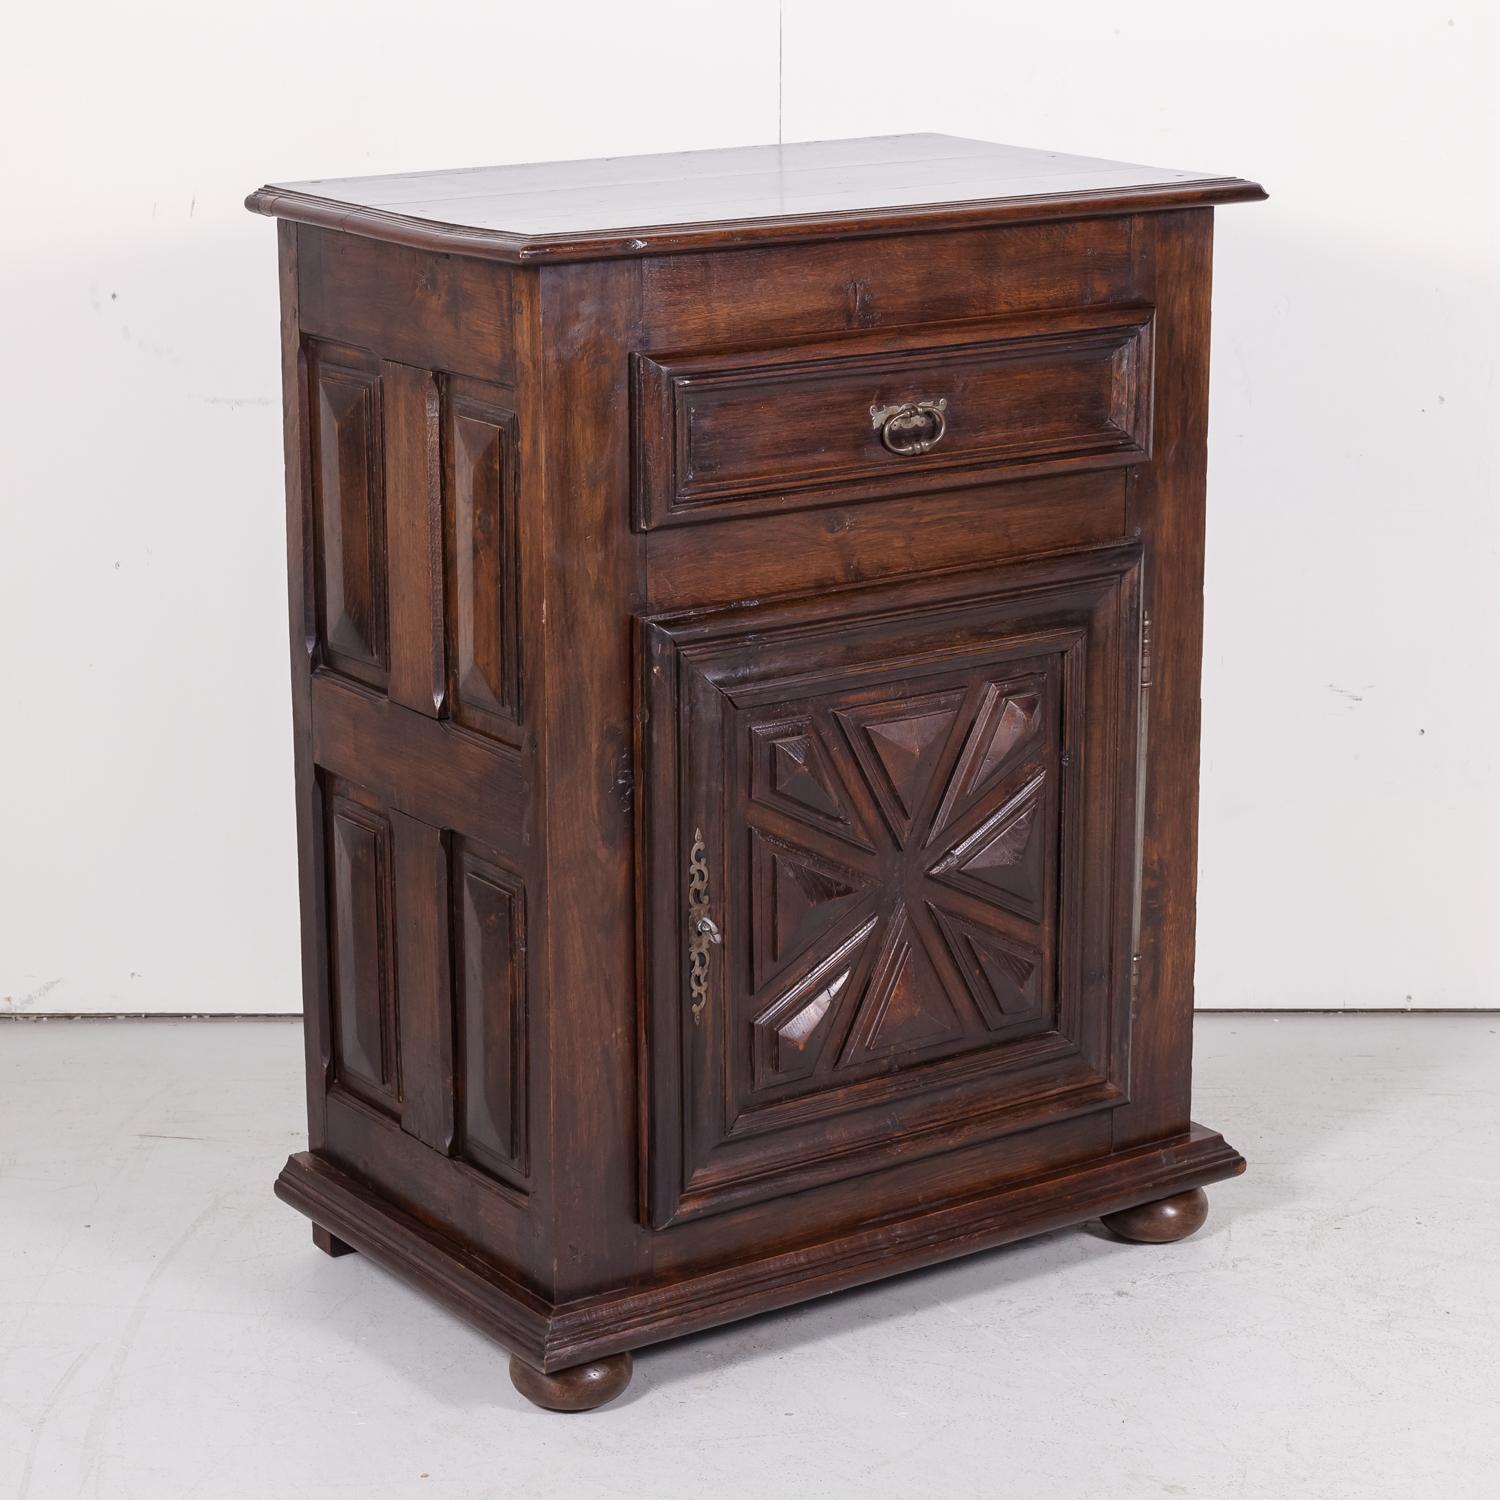 French Early 19th Century Louis XIII Oak Jam Cabinet or Confiturier from Normandy For Sale